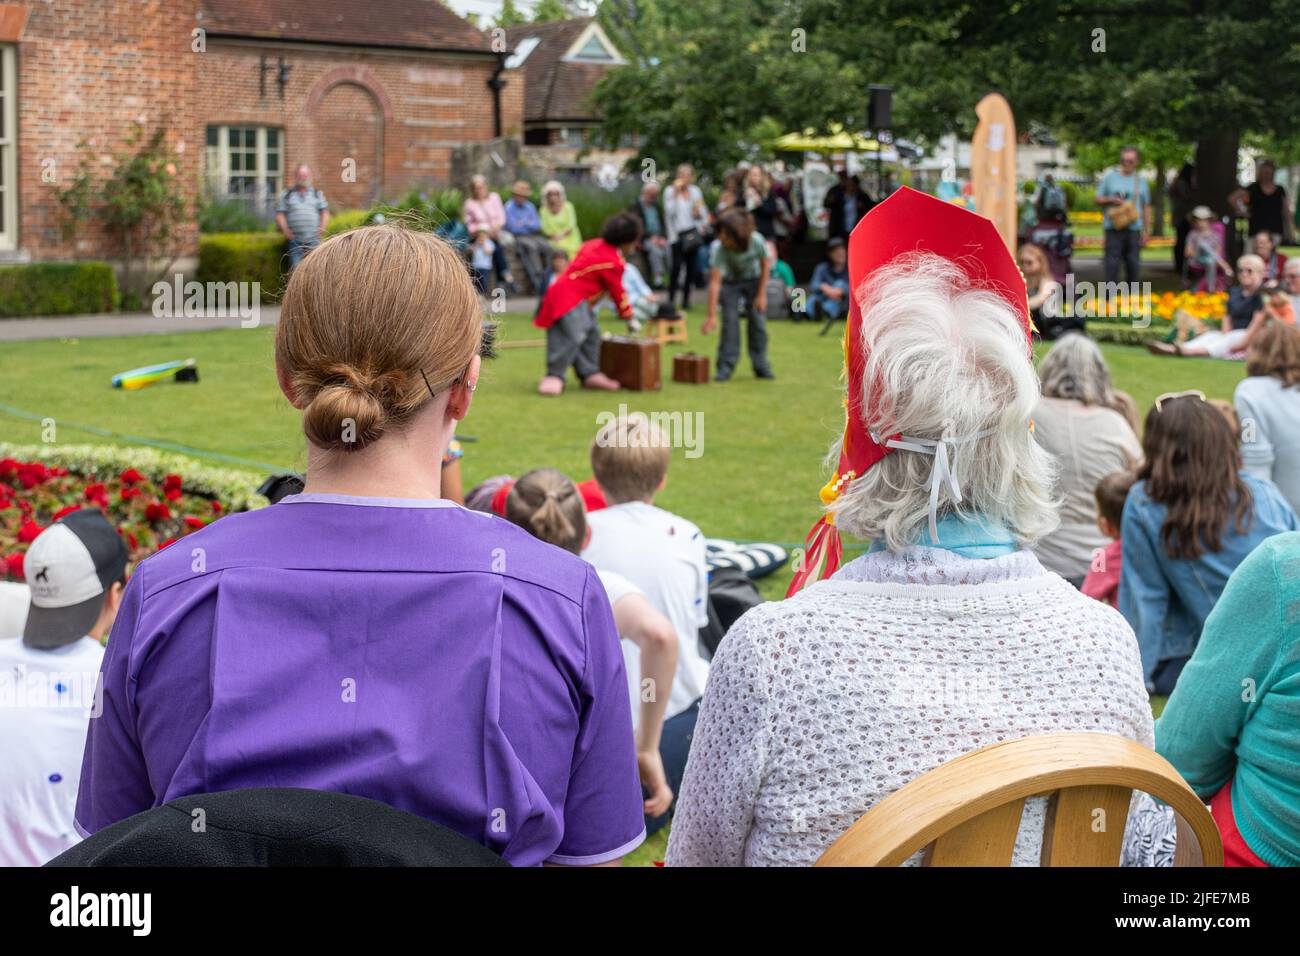 Care worker sitting with elderly lady in a park watching a clown entertainer, England, UK. Carer helping old person with social activities. Stock Photo